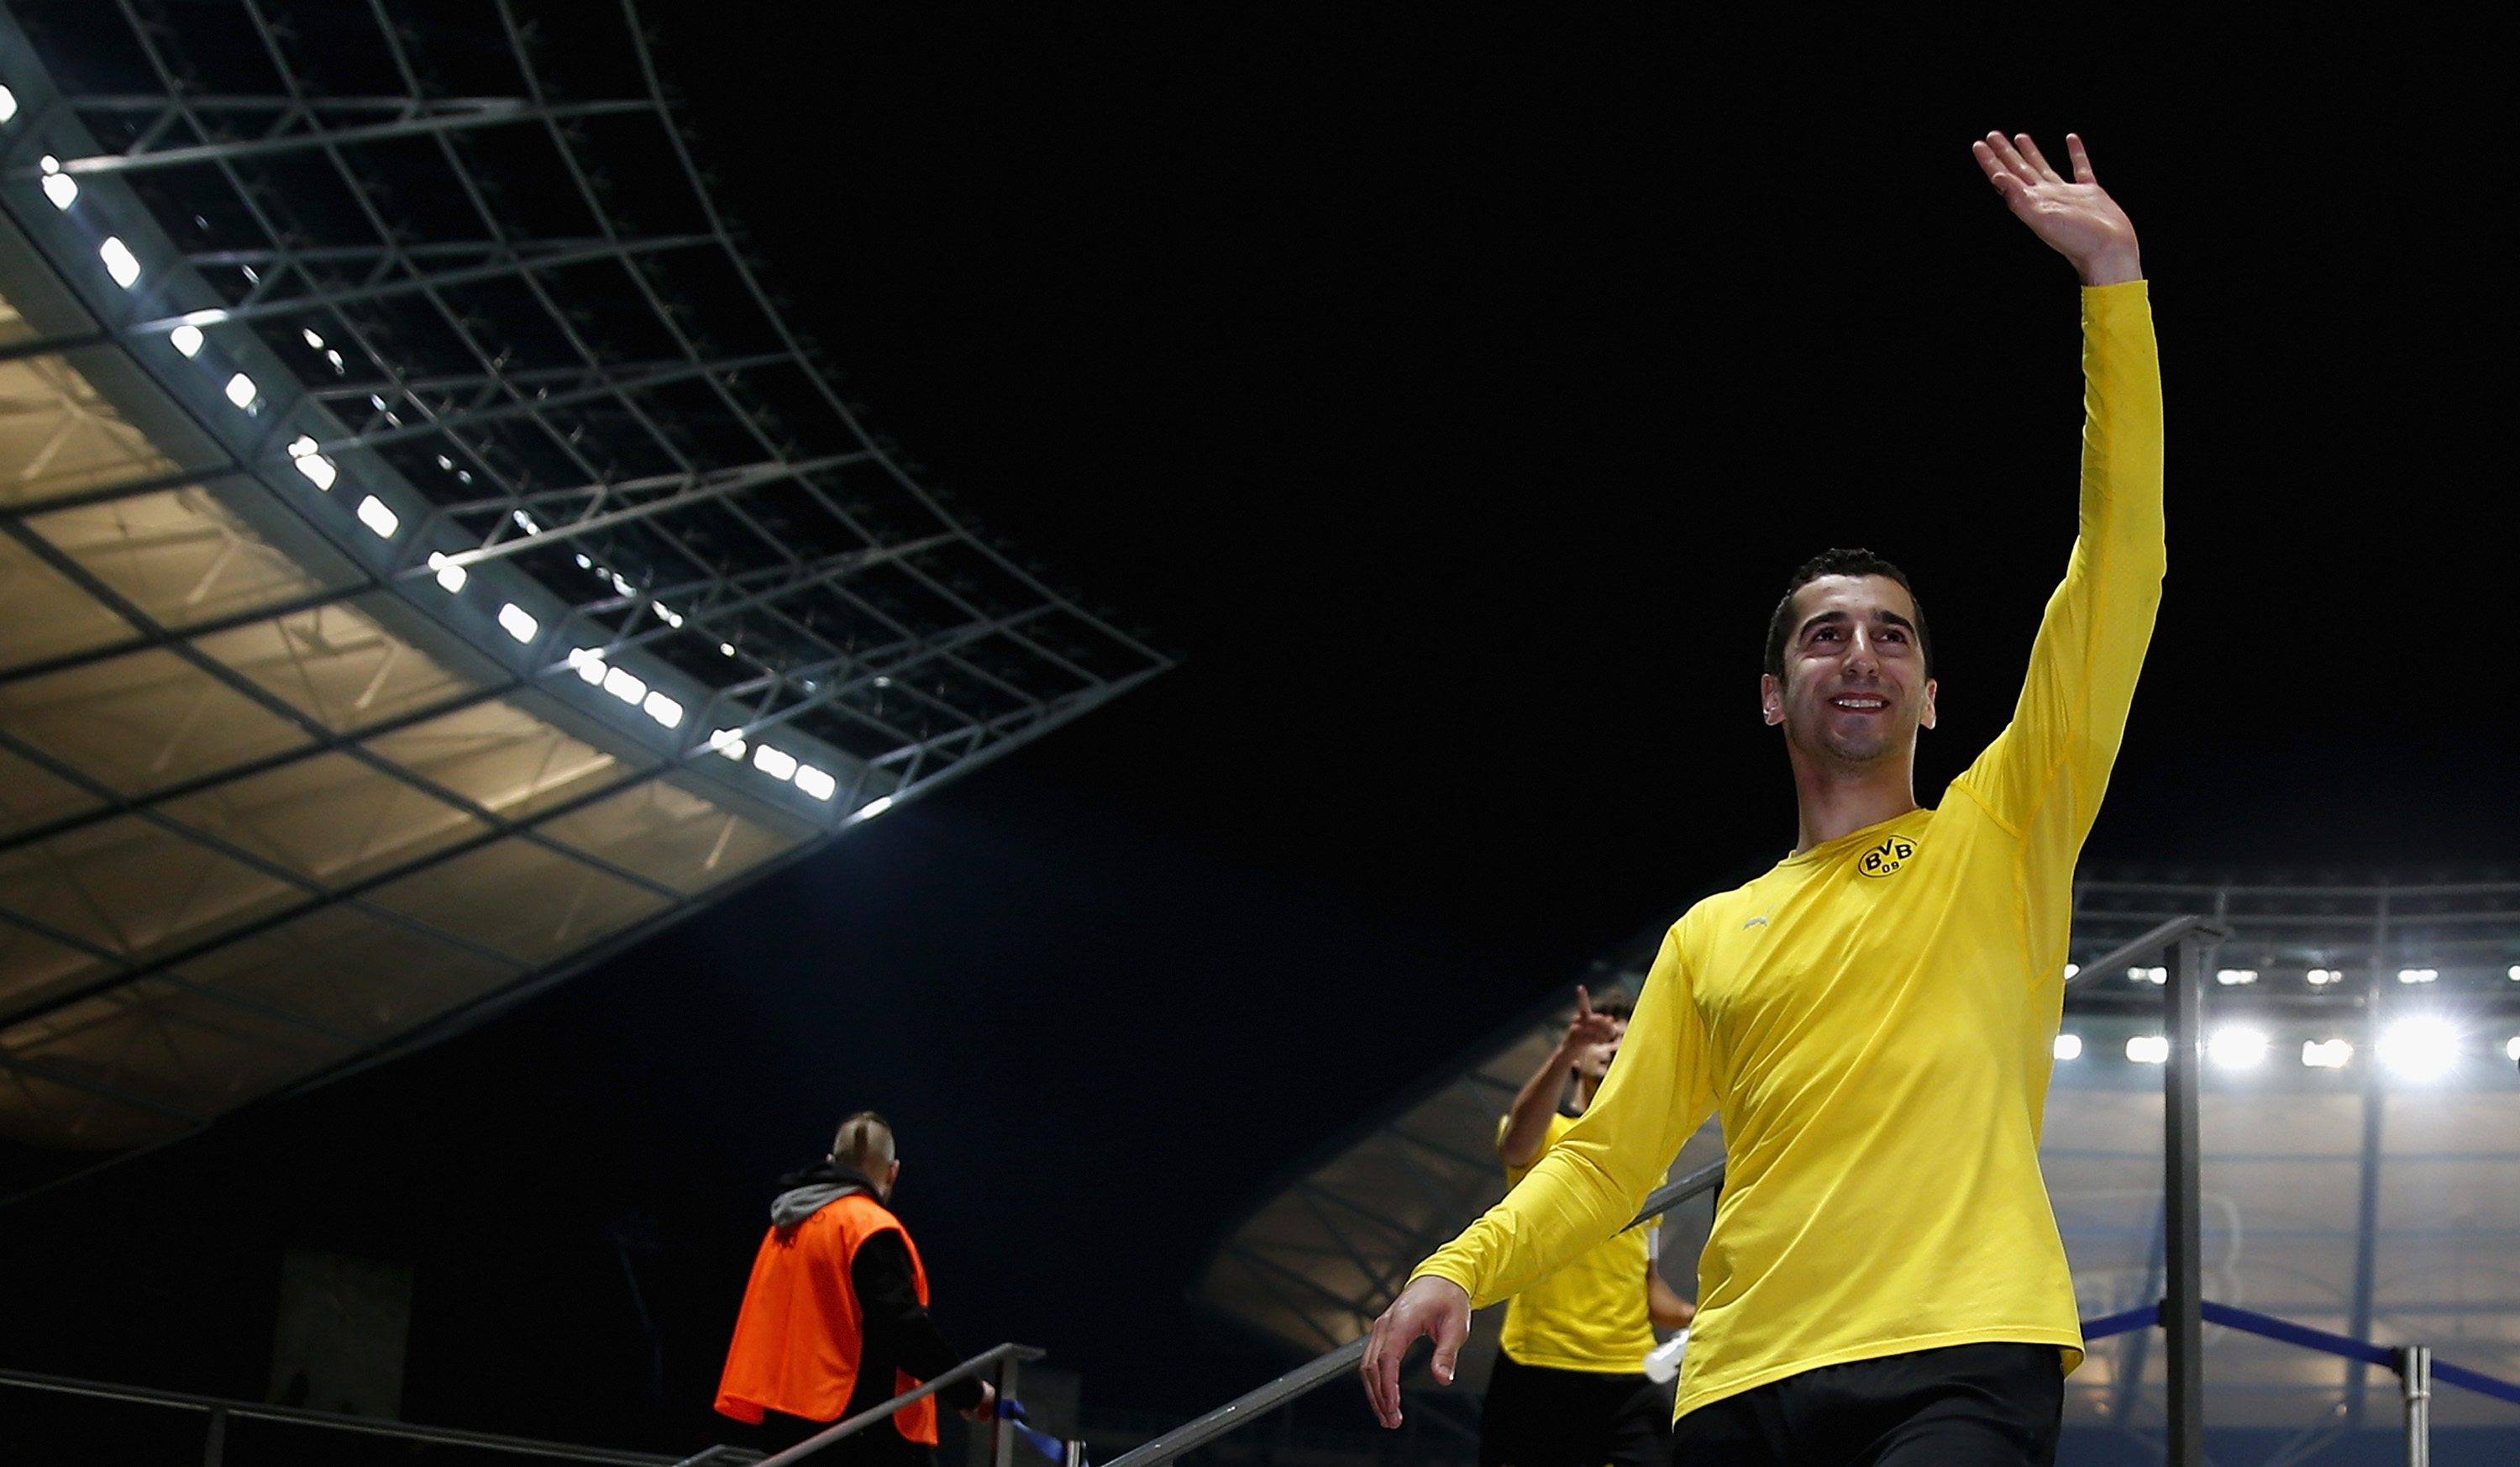 BERLIN, GERMANY - APRIL 20:  Henrikh Mkhitaryan of Dortmund waves to his fans after winning the DFB Cup semi final match between Hertha BSC and Borussia Dortmund at Olympiastadion on April 20, 2016 in Berlin, Germany.  (Photo by Boris Streubel/Bongarts/Getty Images)